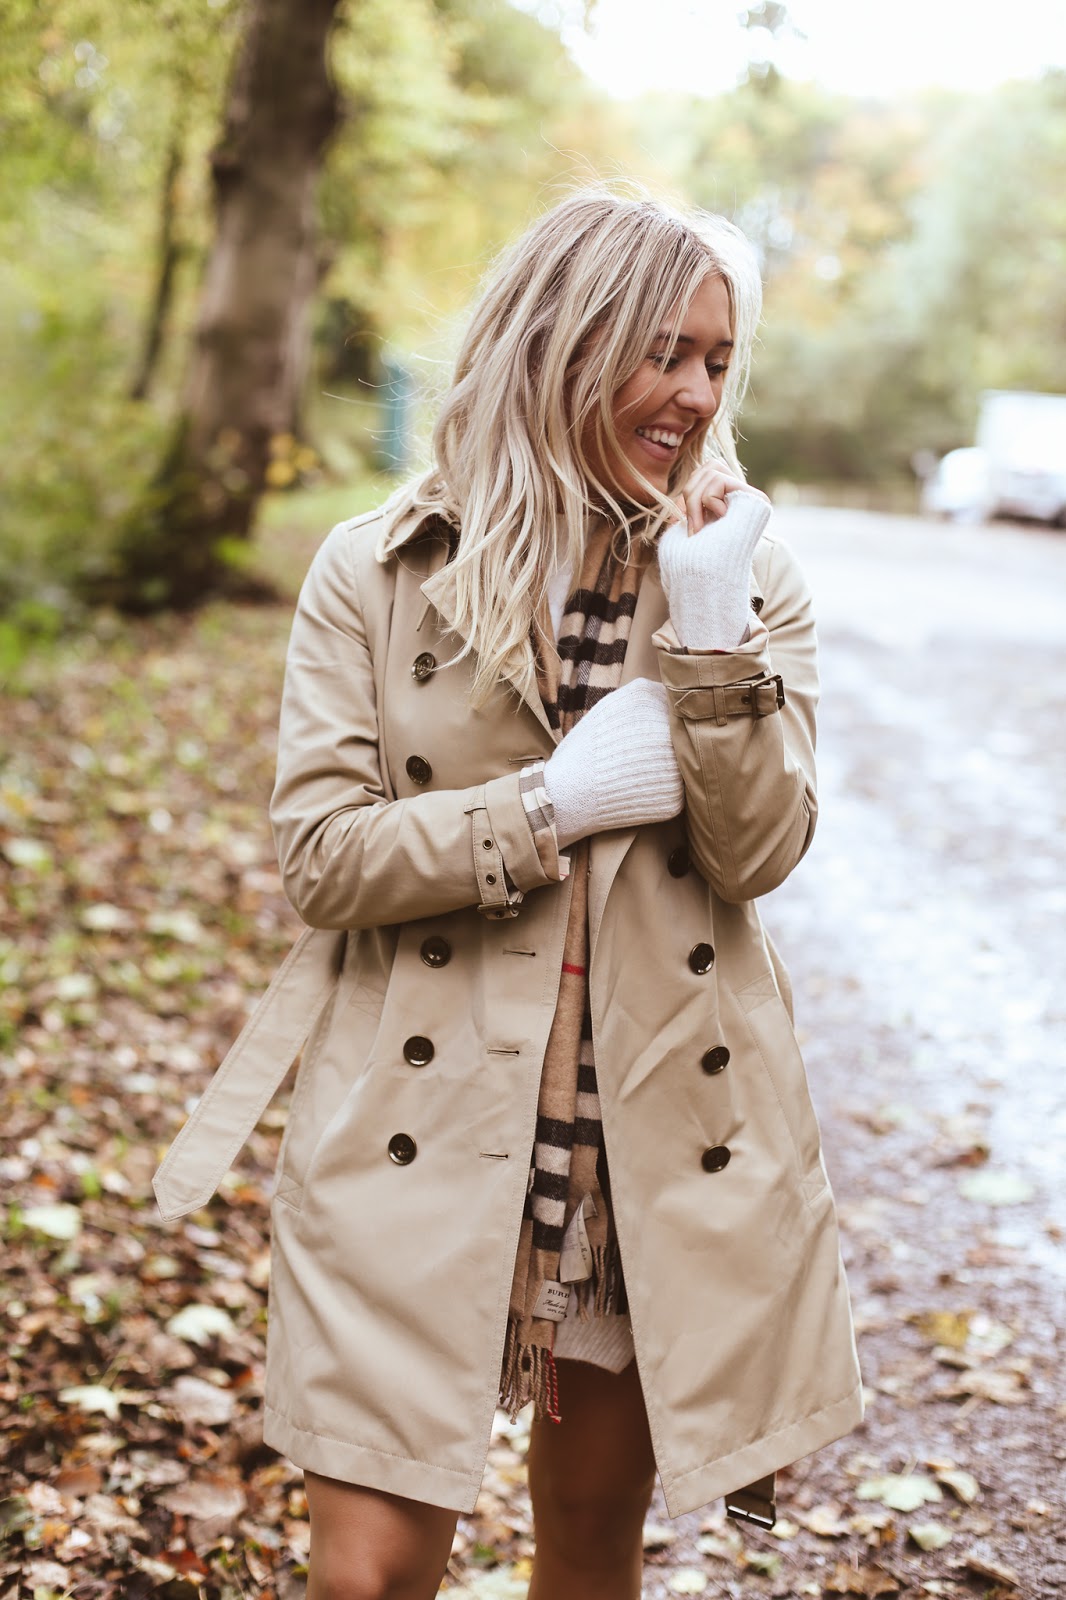 Emtalks: Autumn Walks, Styling Up A Burberry Trench Coat And Burberry Scarf